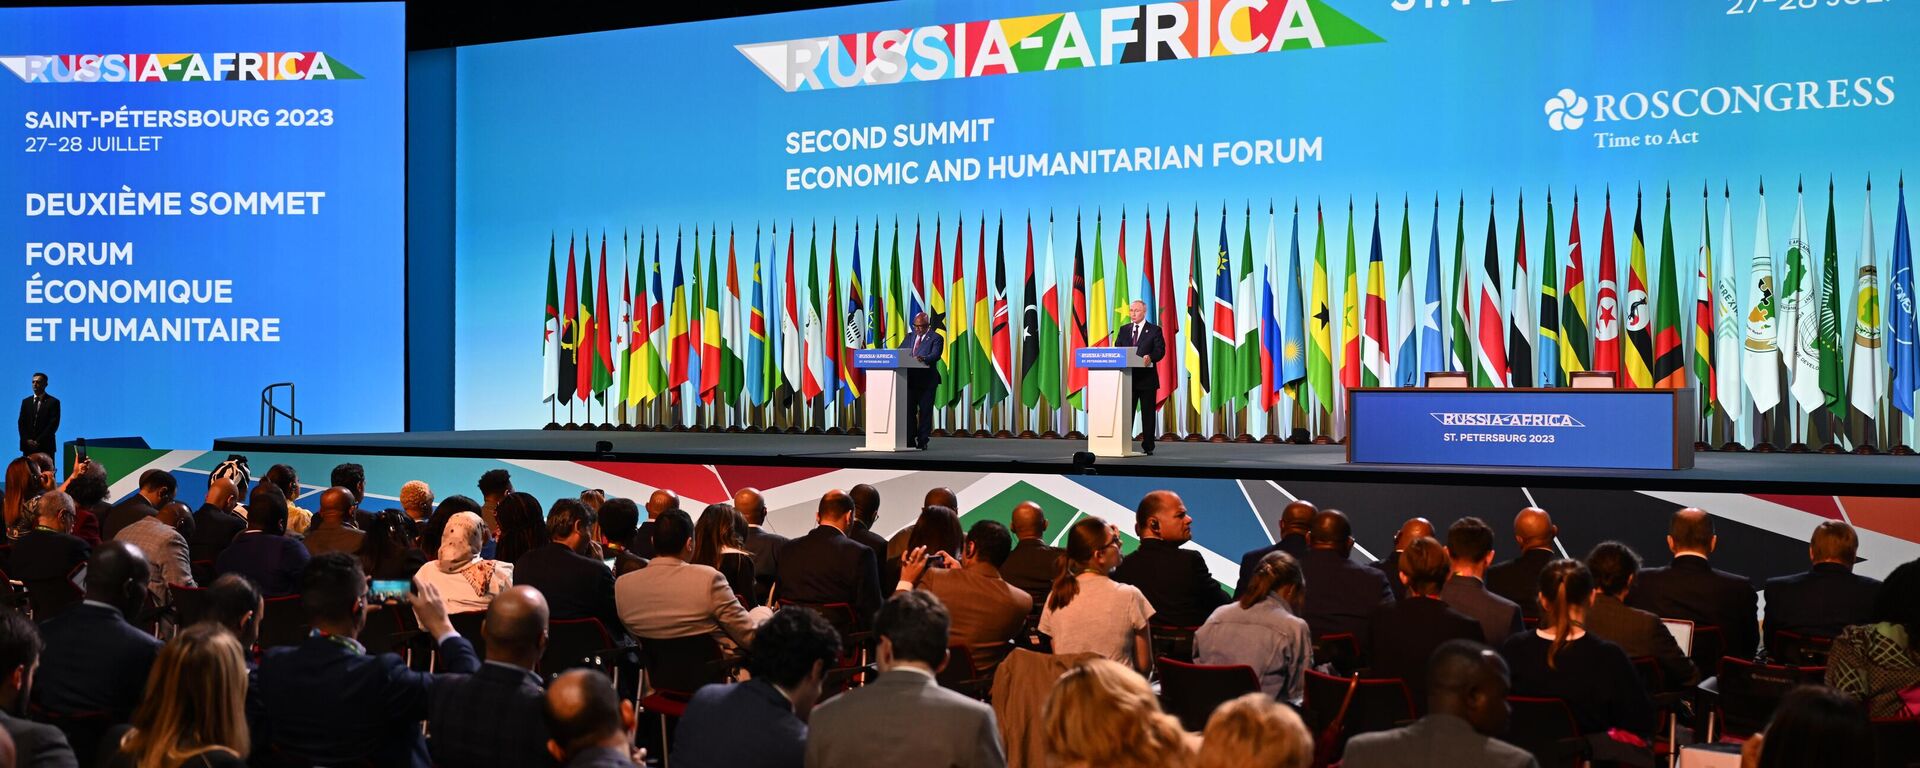 Russian President Vladimir Putin and President of Comoros Azali Assoumani attend a joint statement of the 2nd Russia-Africa Summit at the ExpoForum Congress and Exhibition Center in St. Petersburg, Russia, on July 28, 2023. - Sputnik Africa, 1920, 27.02.2024